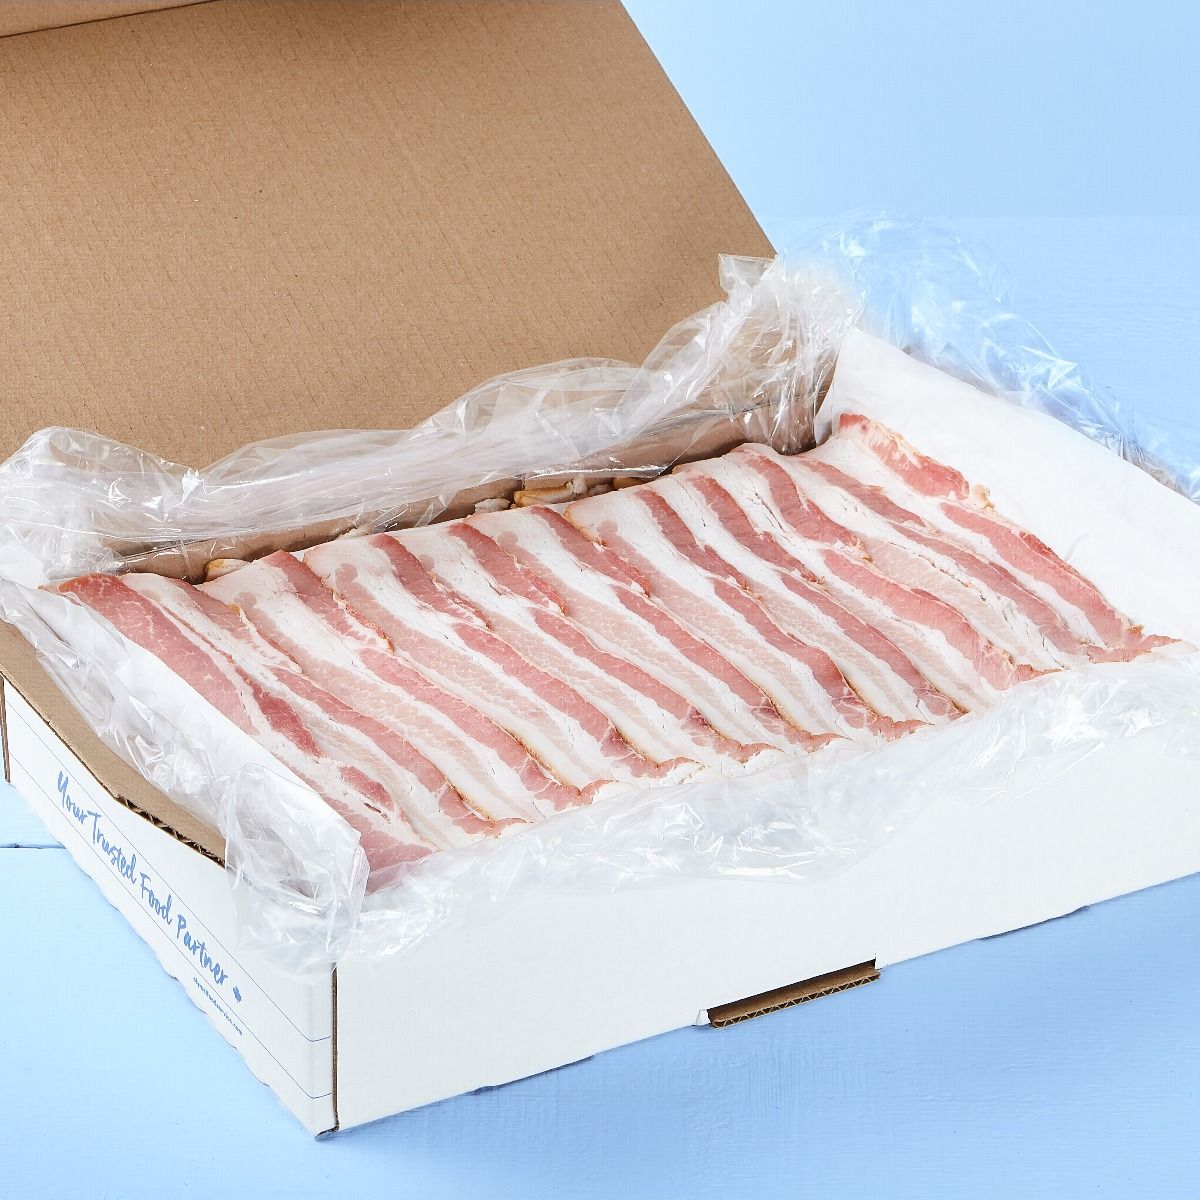 Fresh layer out sliced bacon, 22 slices / 2 '' (formerly 18-22 slices / Lb)